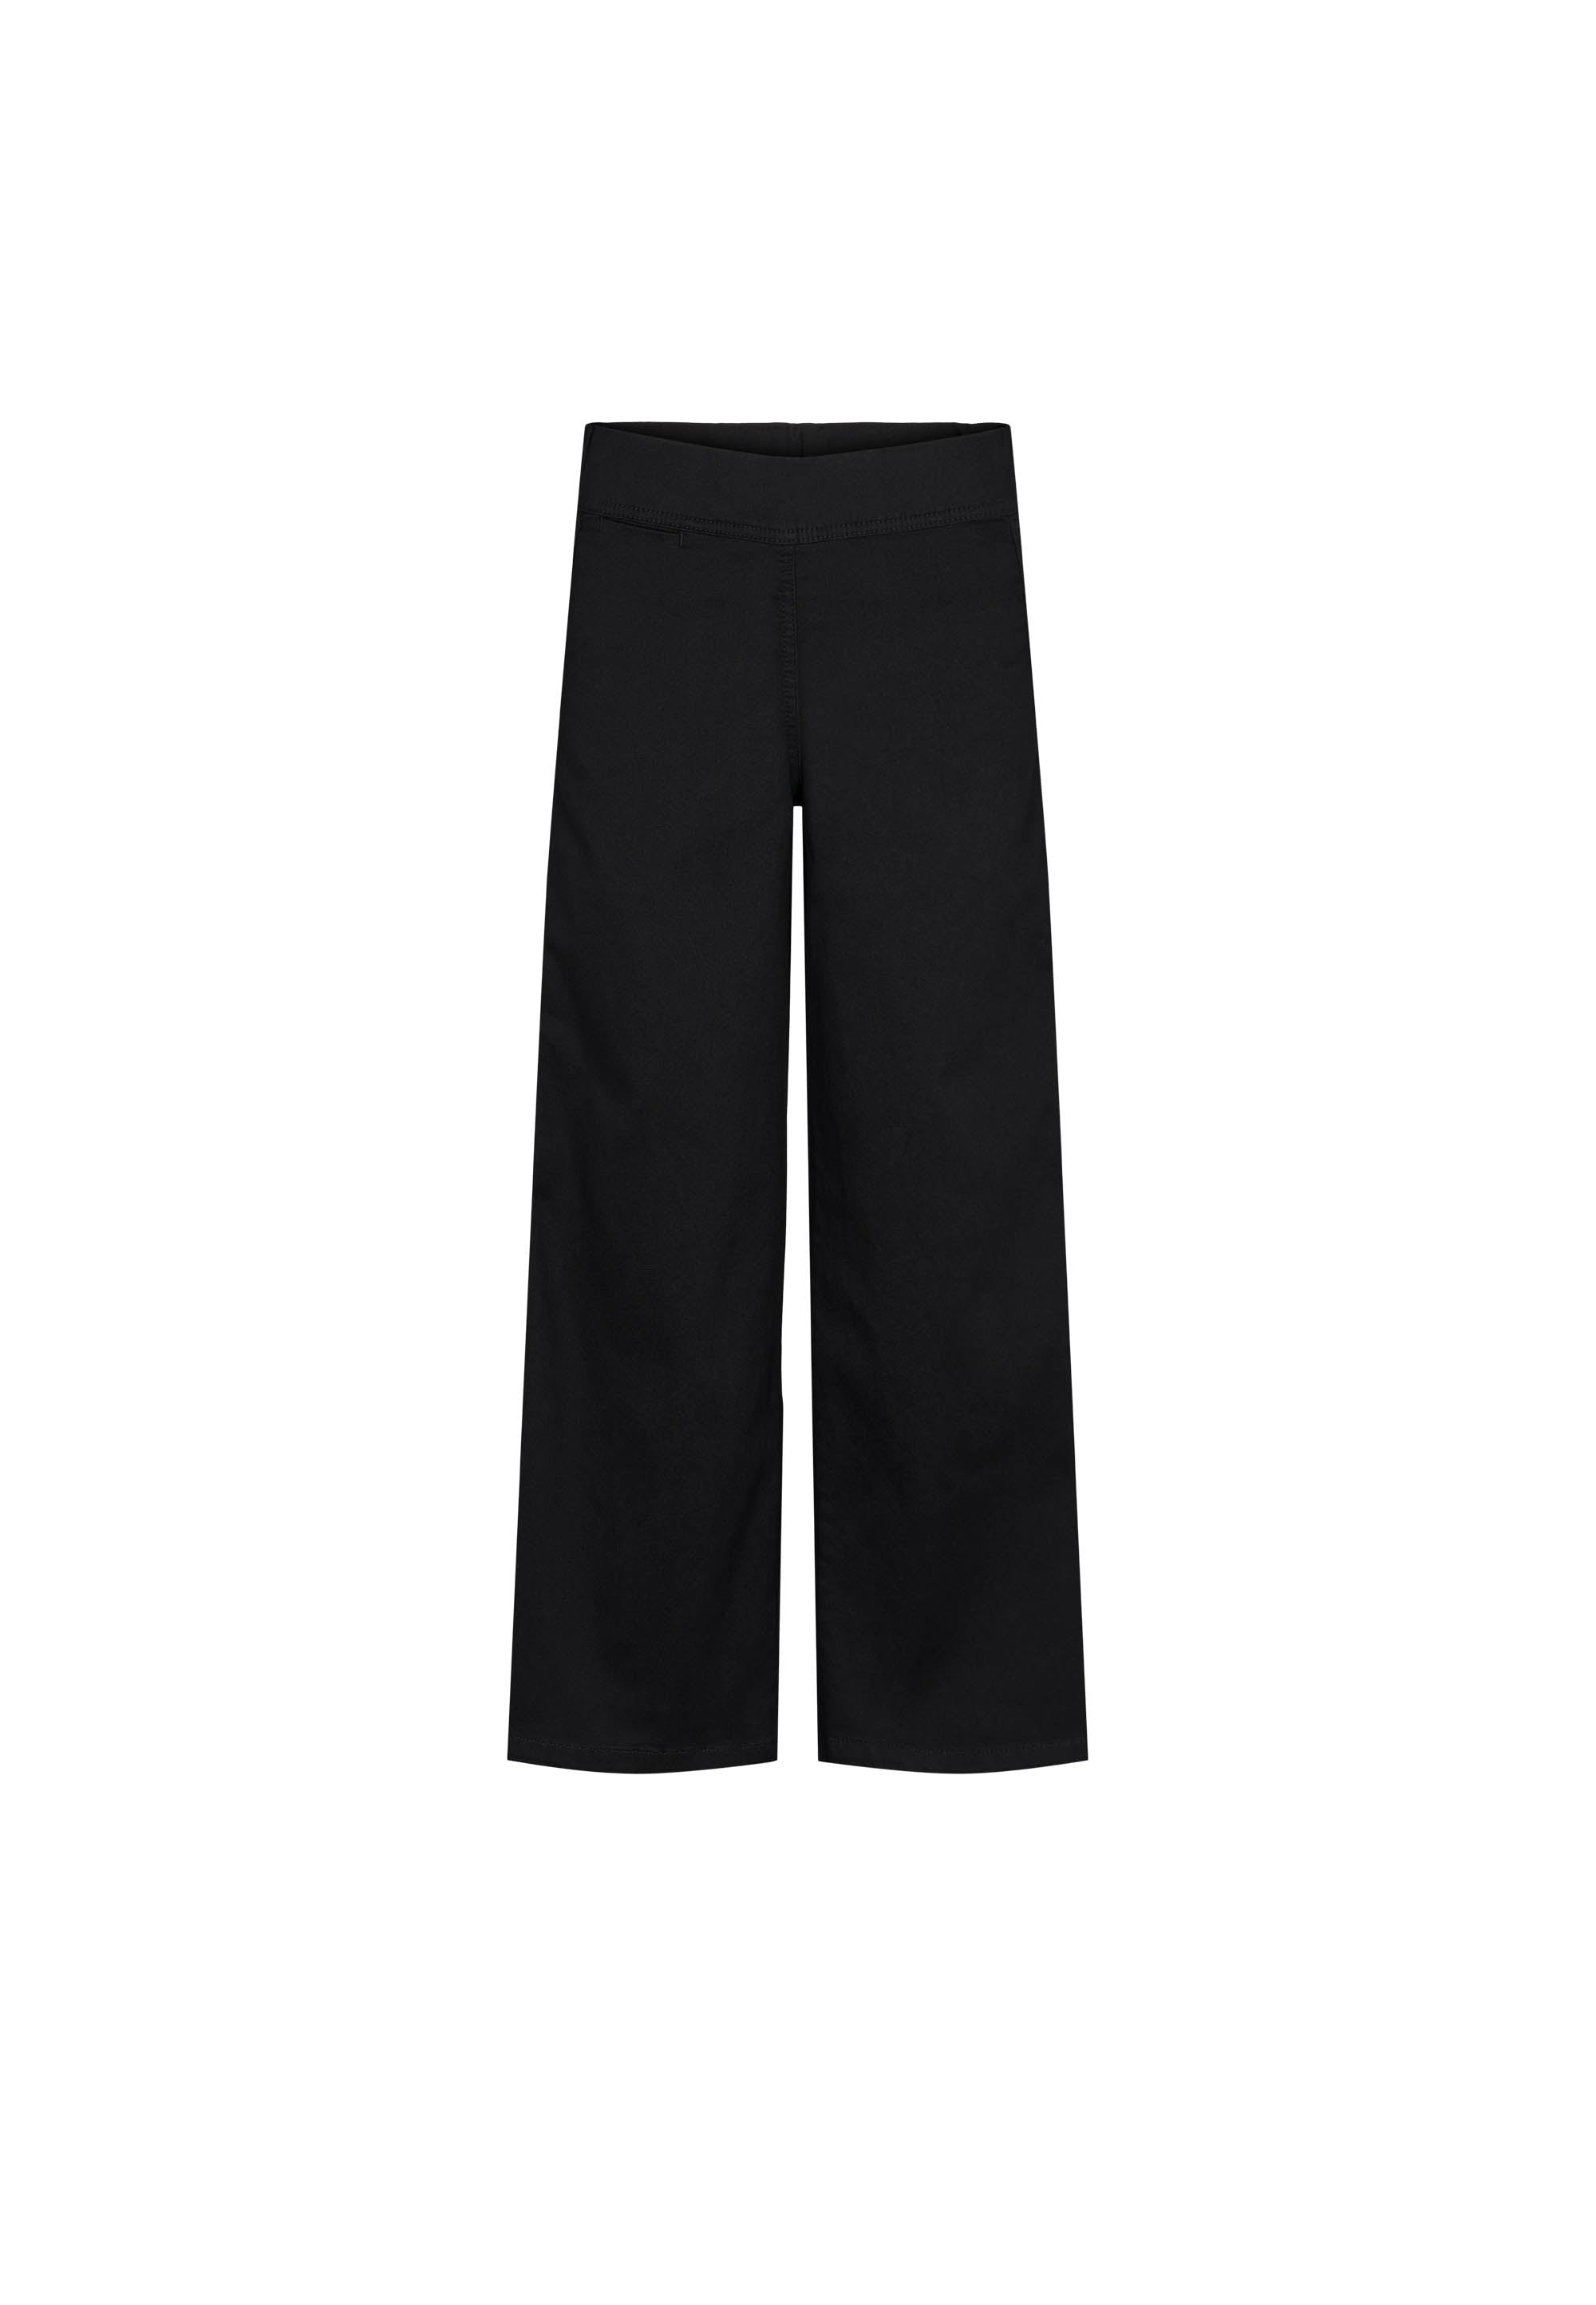 LAURIE Serene Loose - Extra Short Length Trousers LOOSE 99000 Black